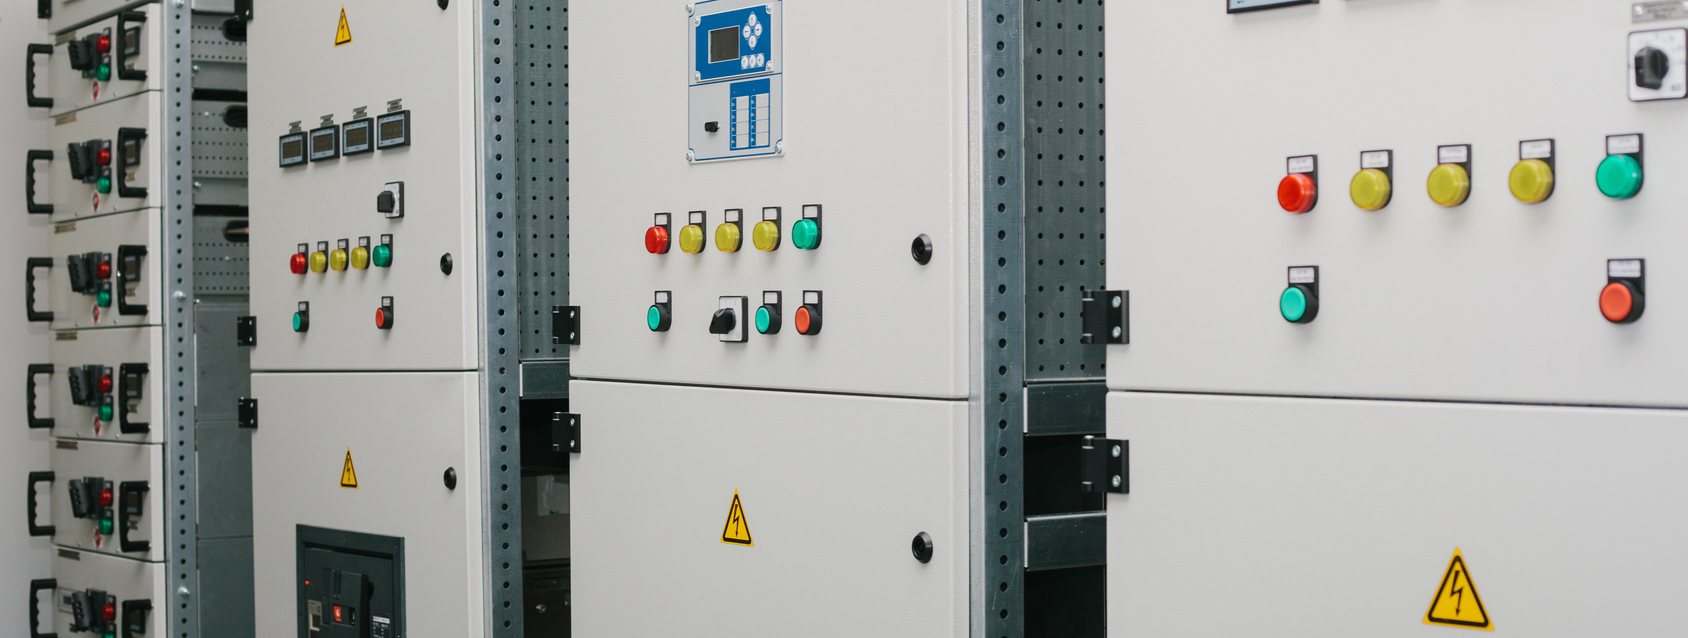 Low-voltage cabinet. Uninterrupted power. Electrical power.